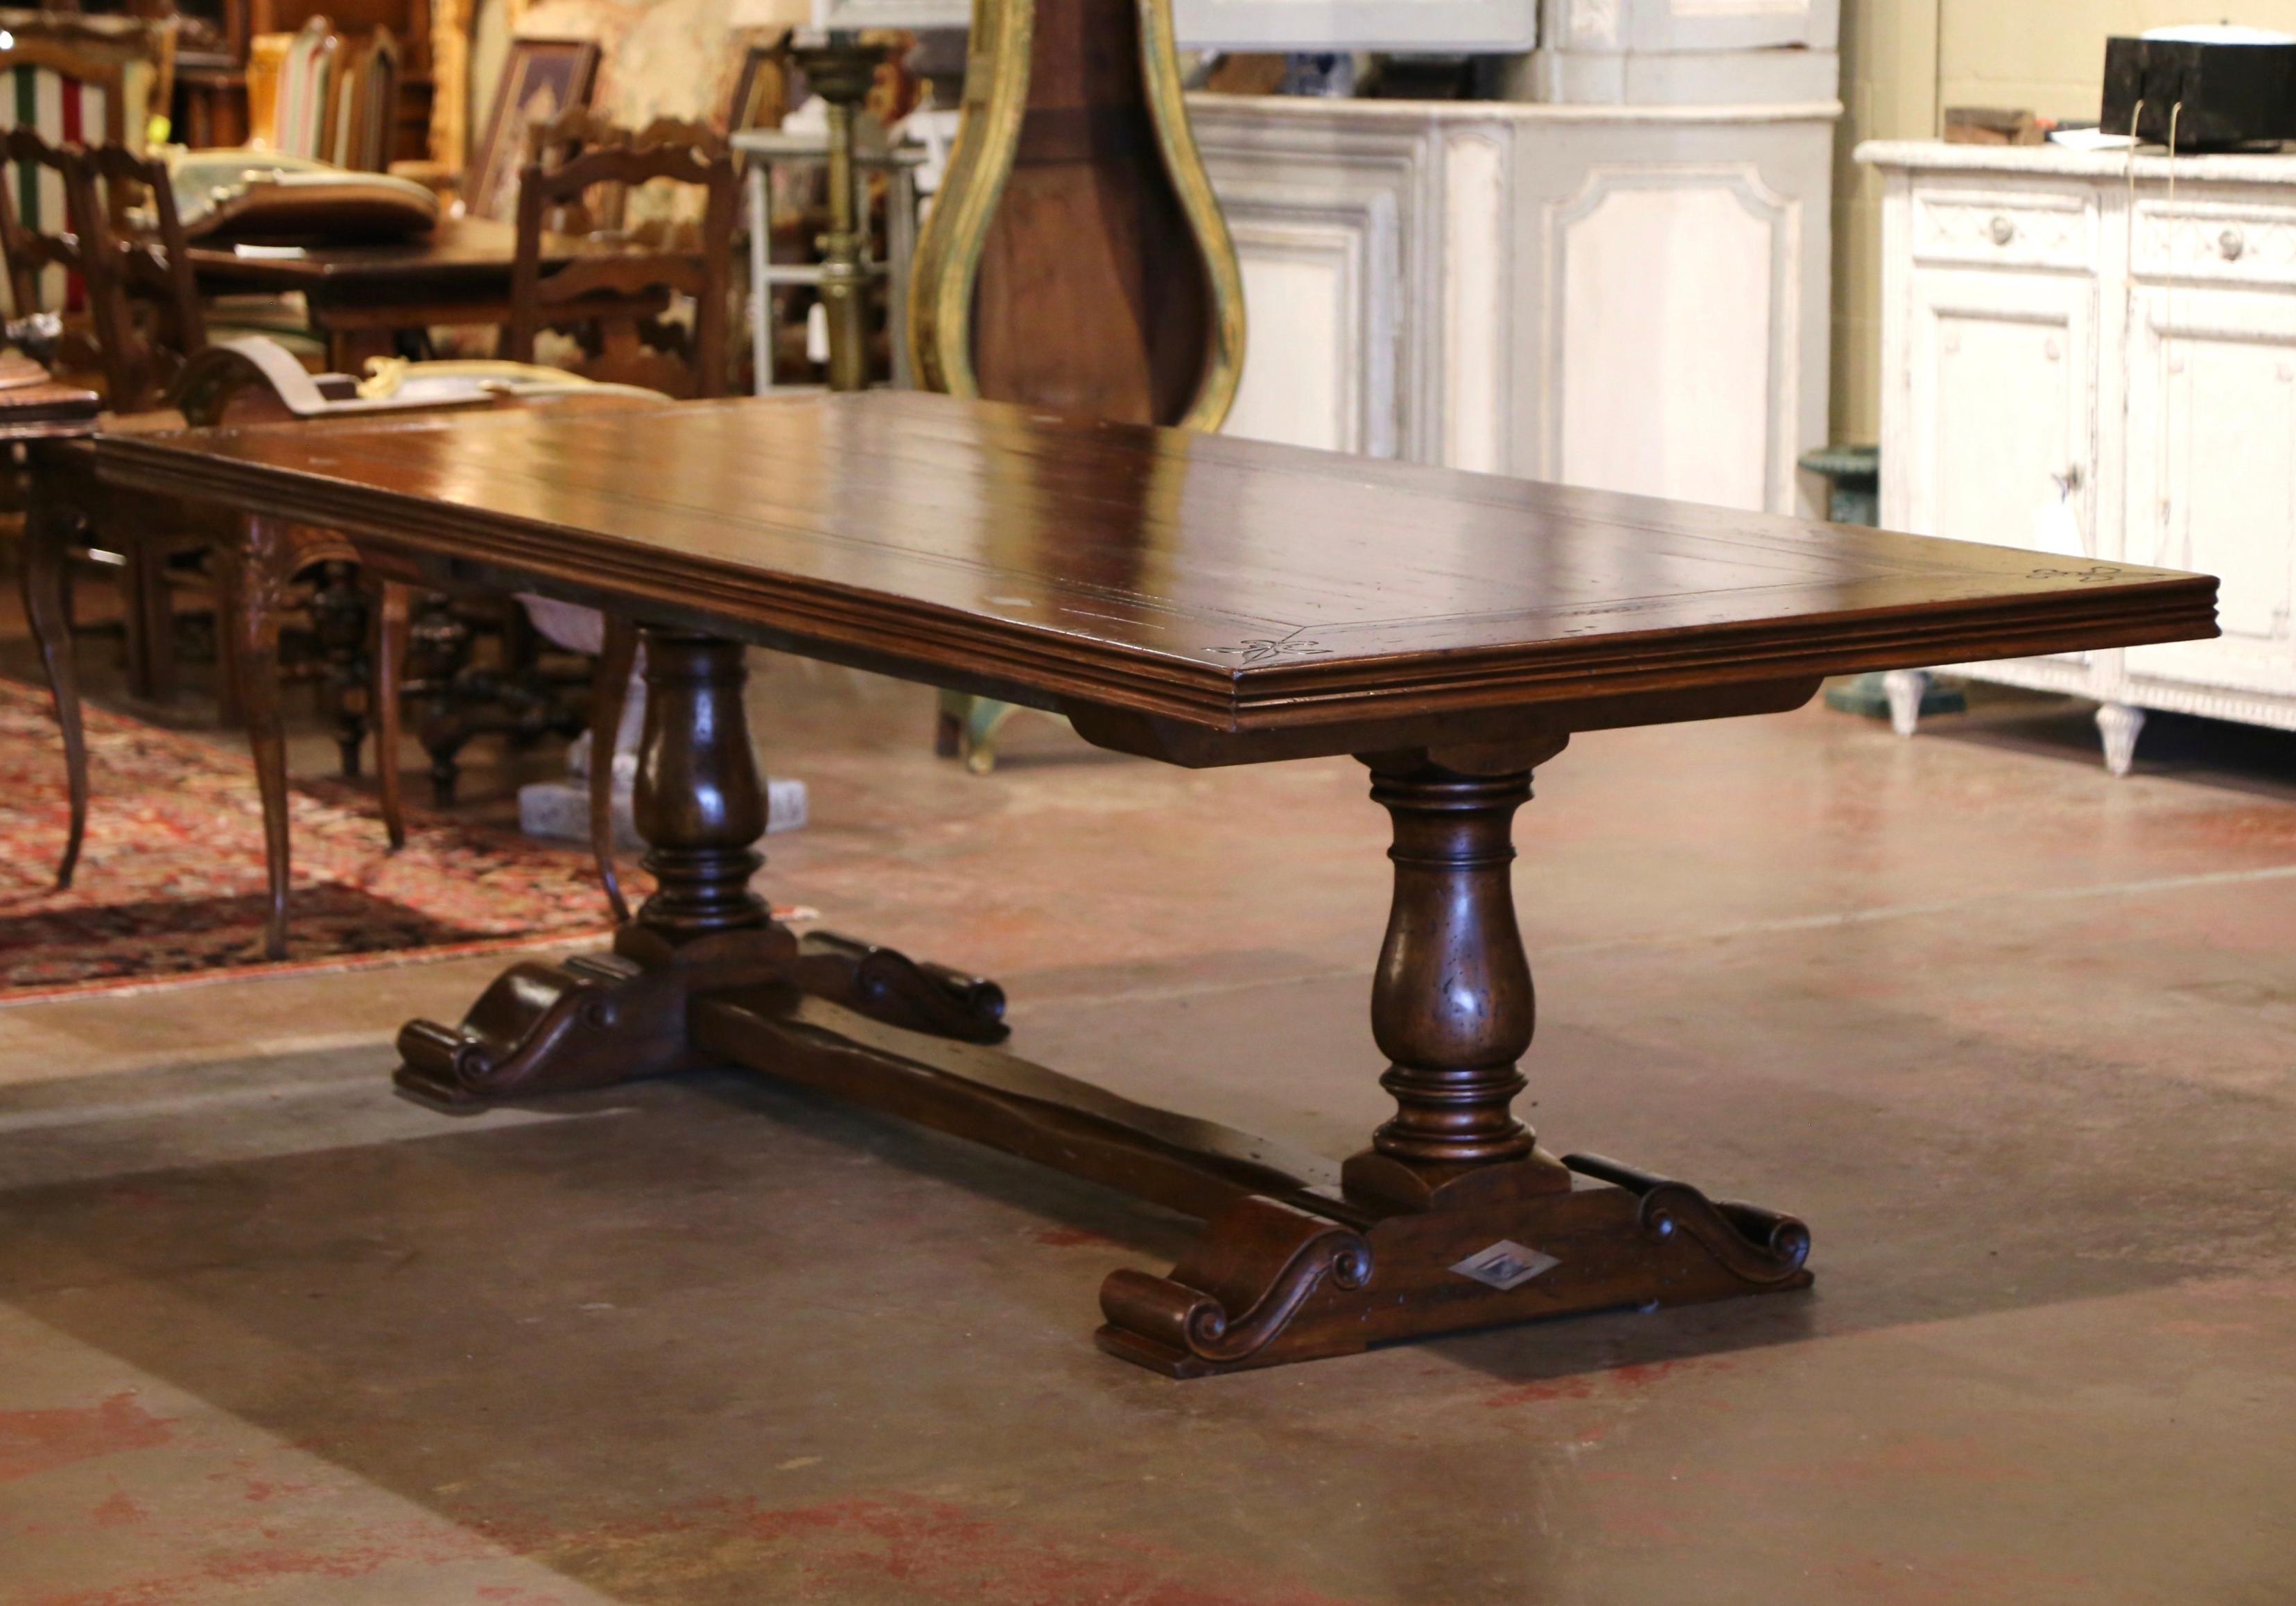  This large 9 feet long fruitwood dining table was crafted in southwest France, near the Spanish and French border. Built with antique walnut timber, the table stands on a trestle base, supported with hand carved baluster legs connected at the base